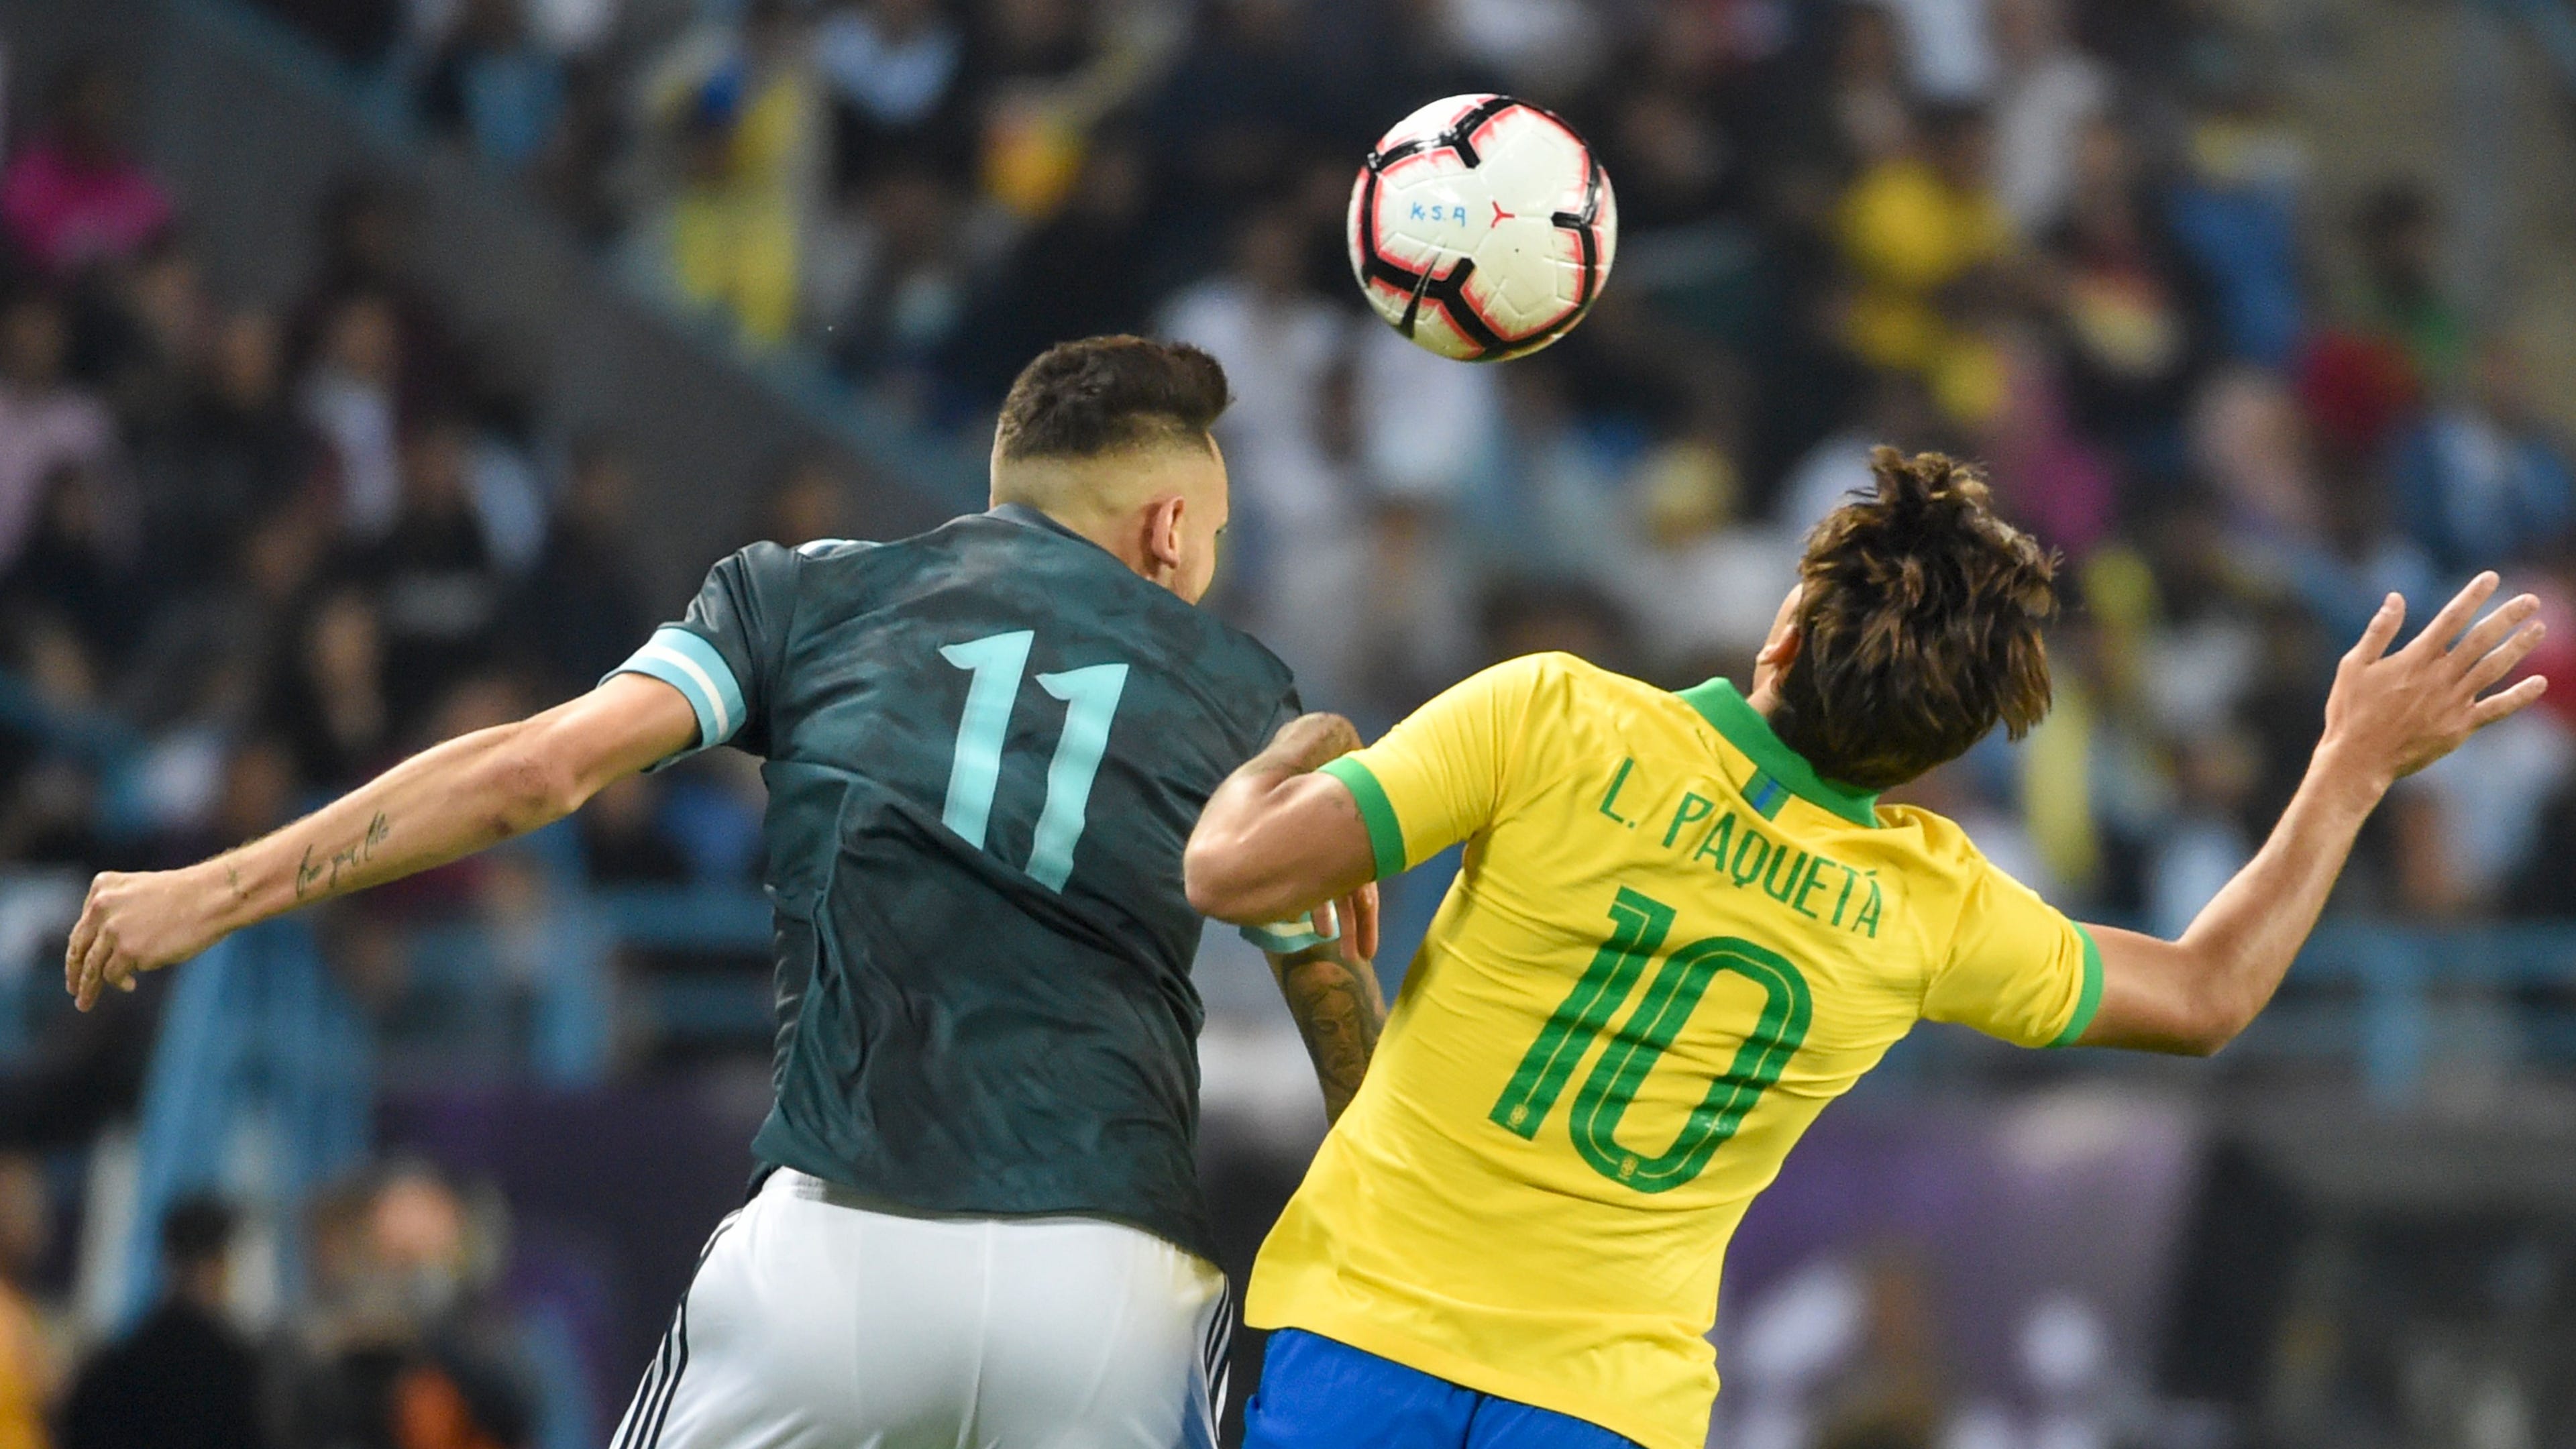 Paqueta ready for Brazil's number 10 shirt